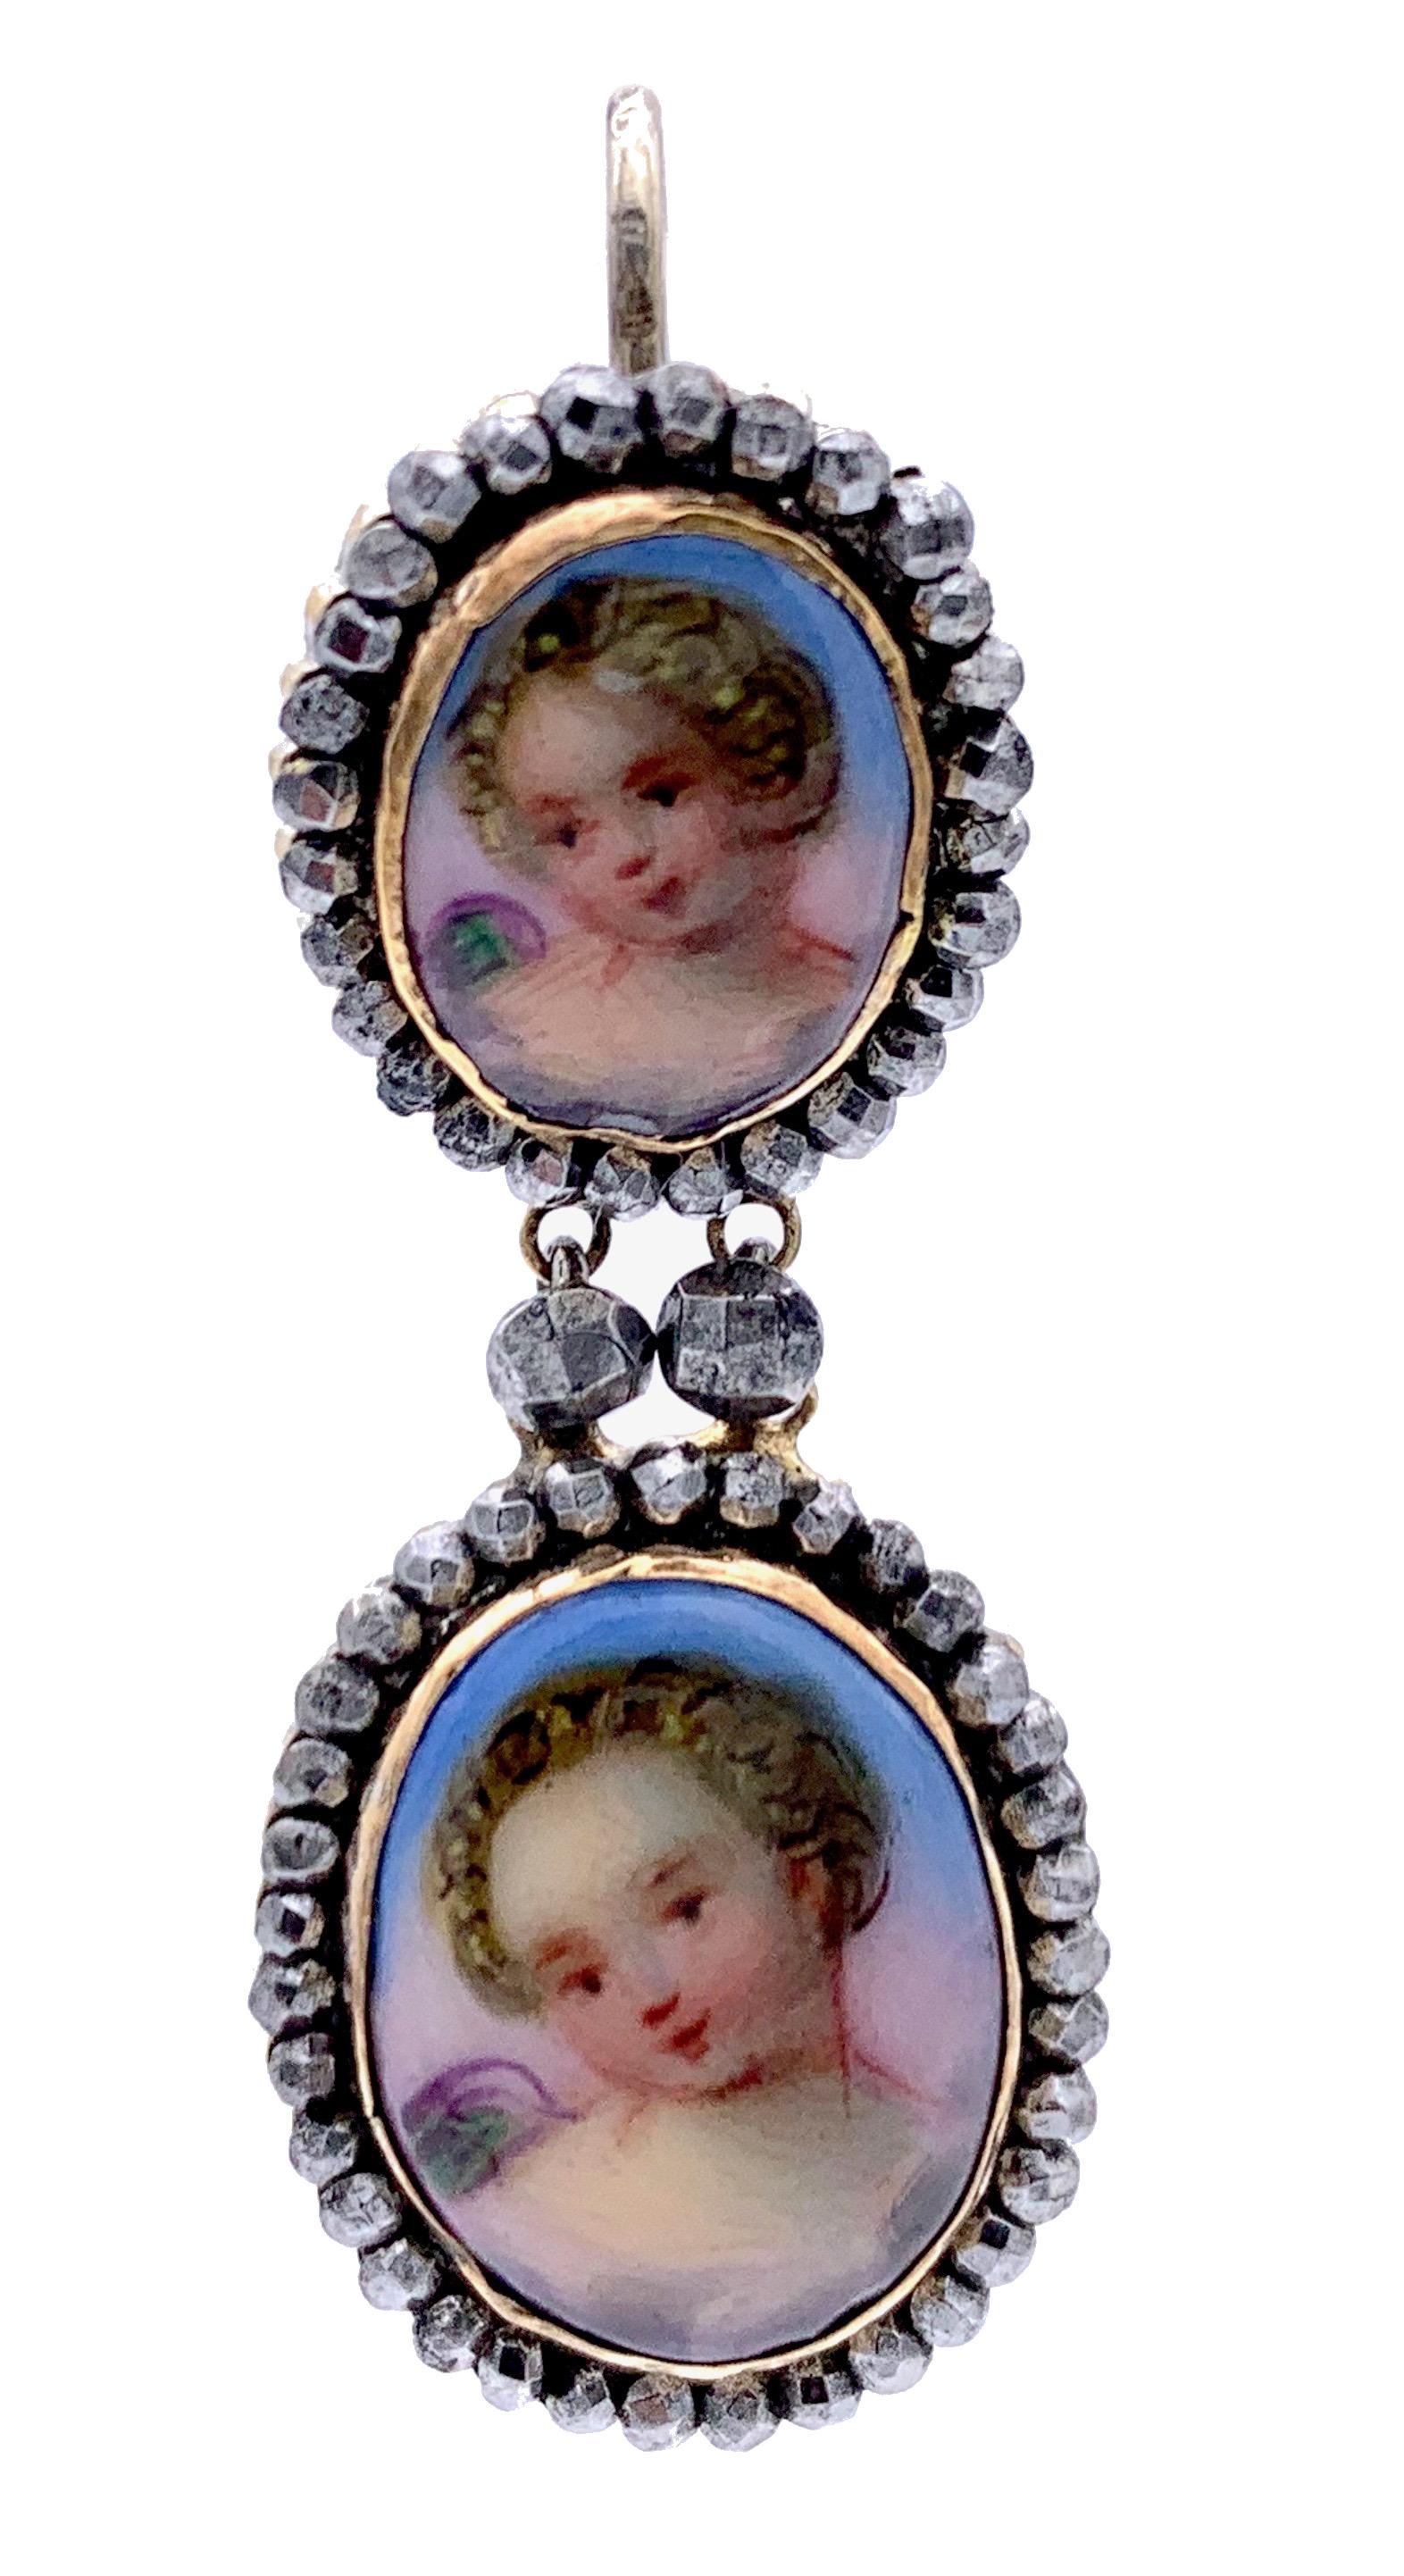 Very rare Victorian dangling earrings made out of cut steel and painted porcelain plaques depicting cherubs.  